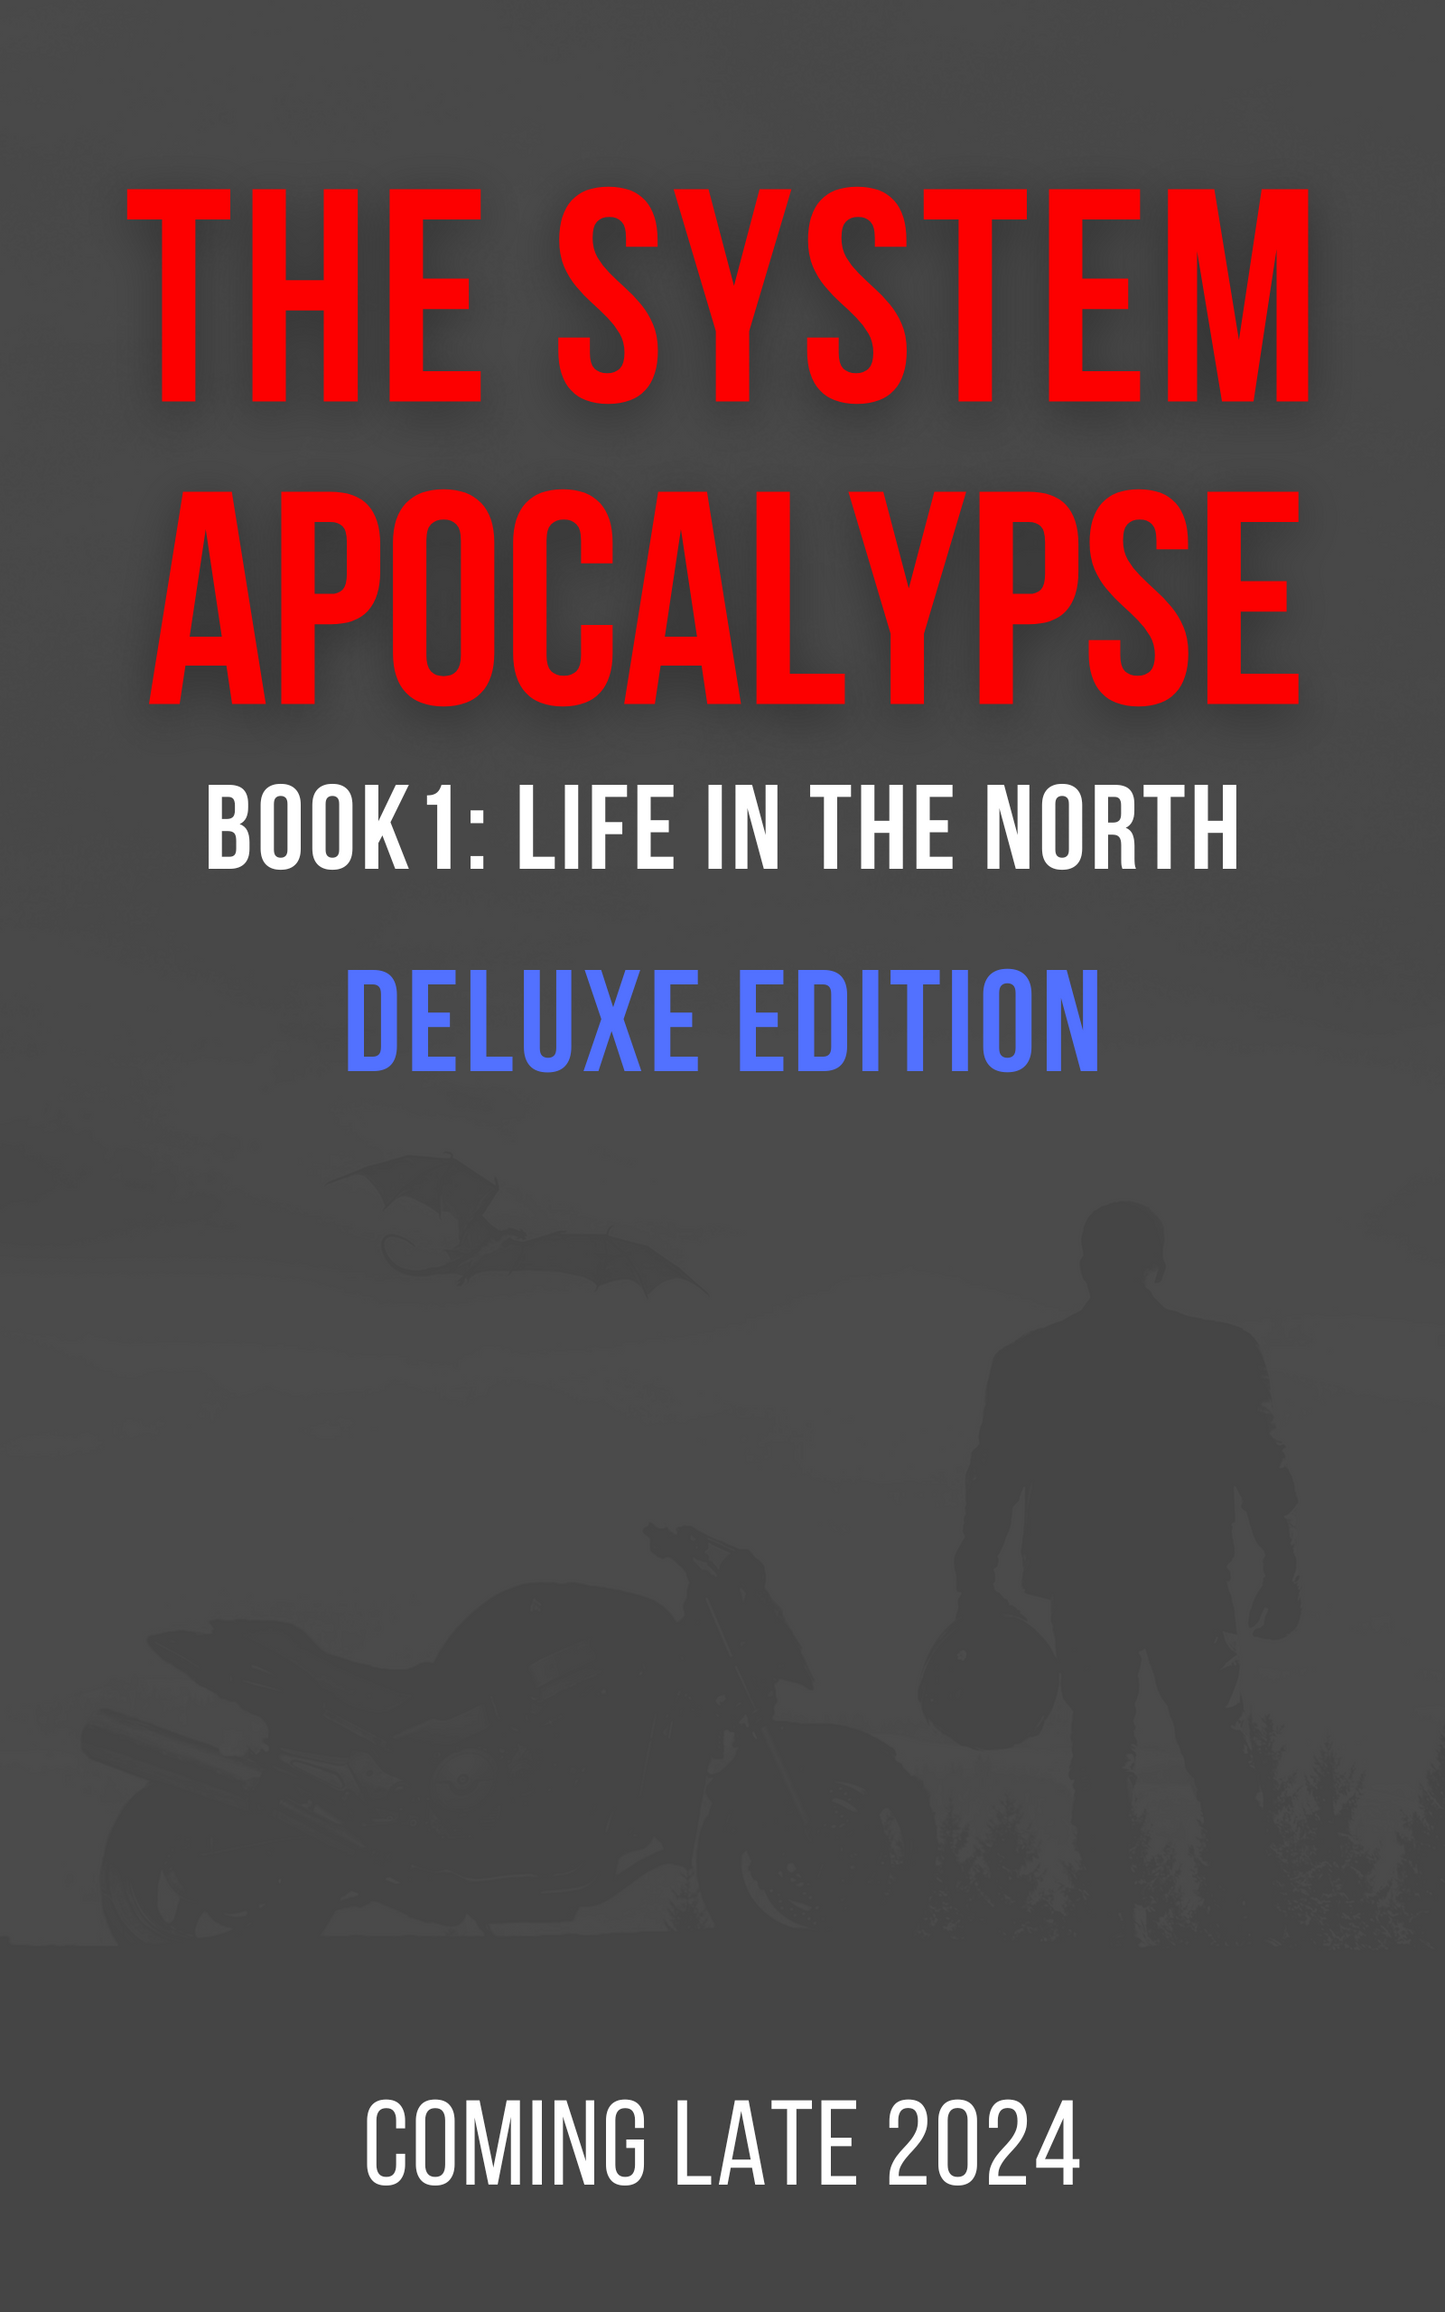 Life in the North: Deluxe Edition (System Apocalypse #1)